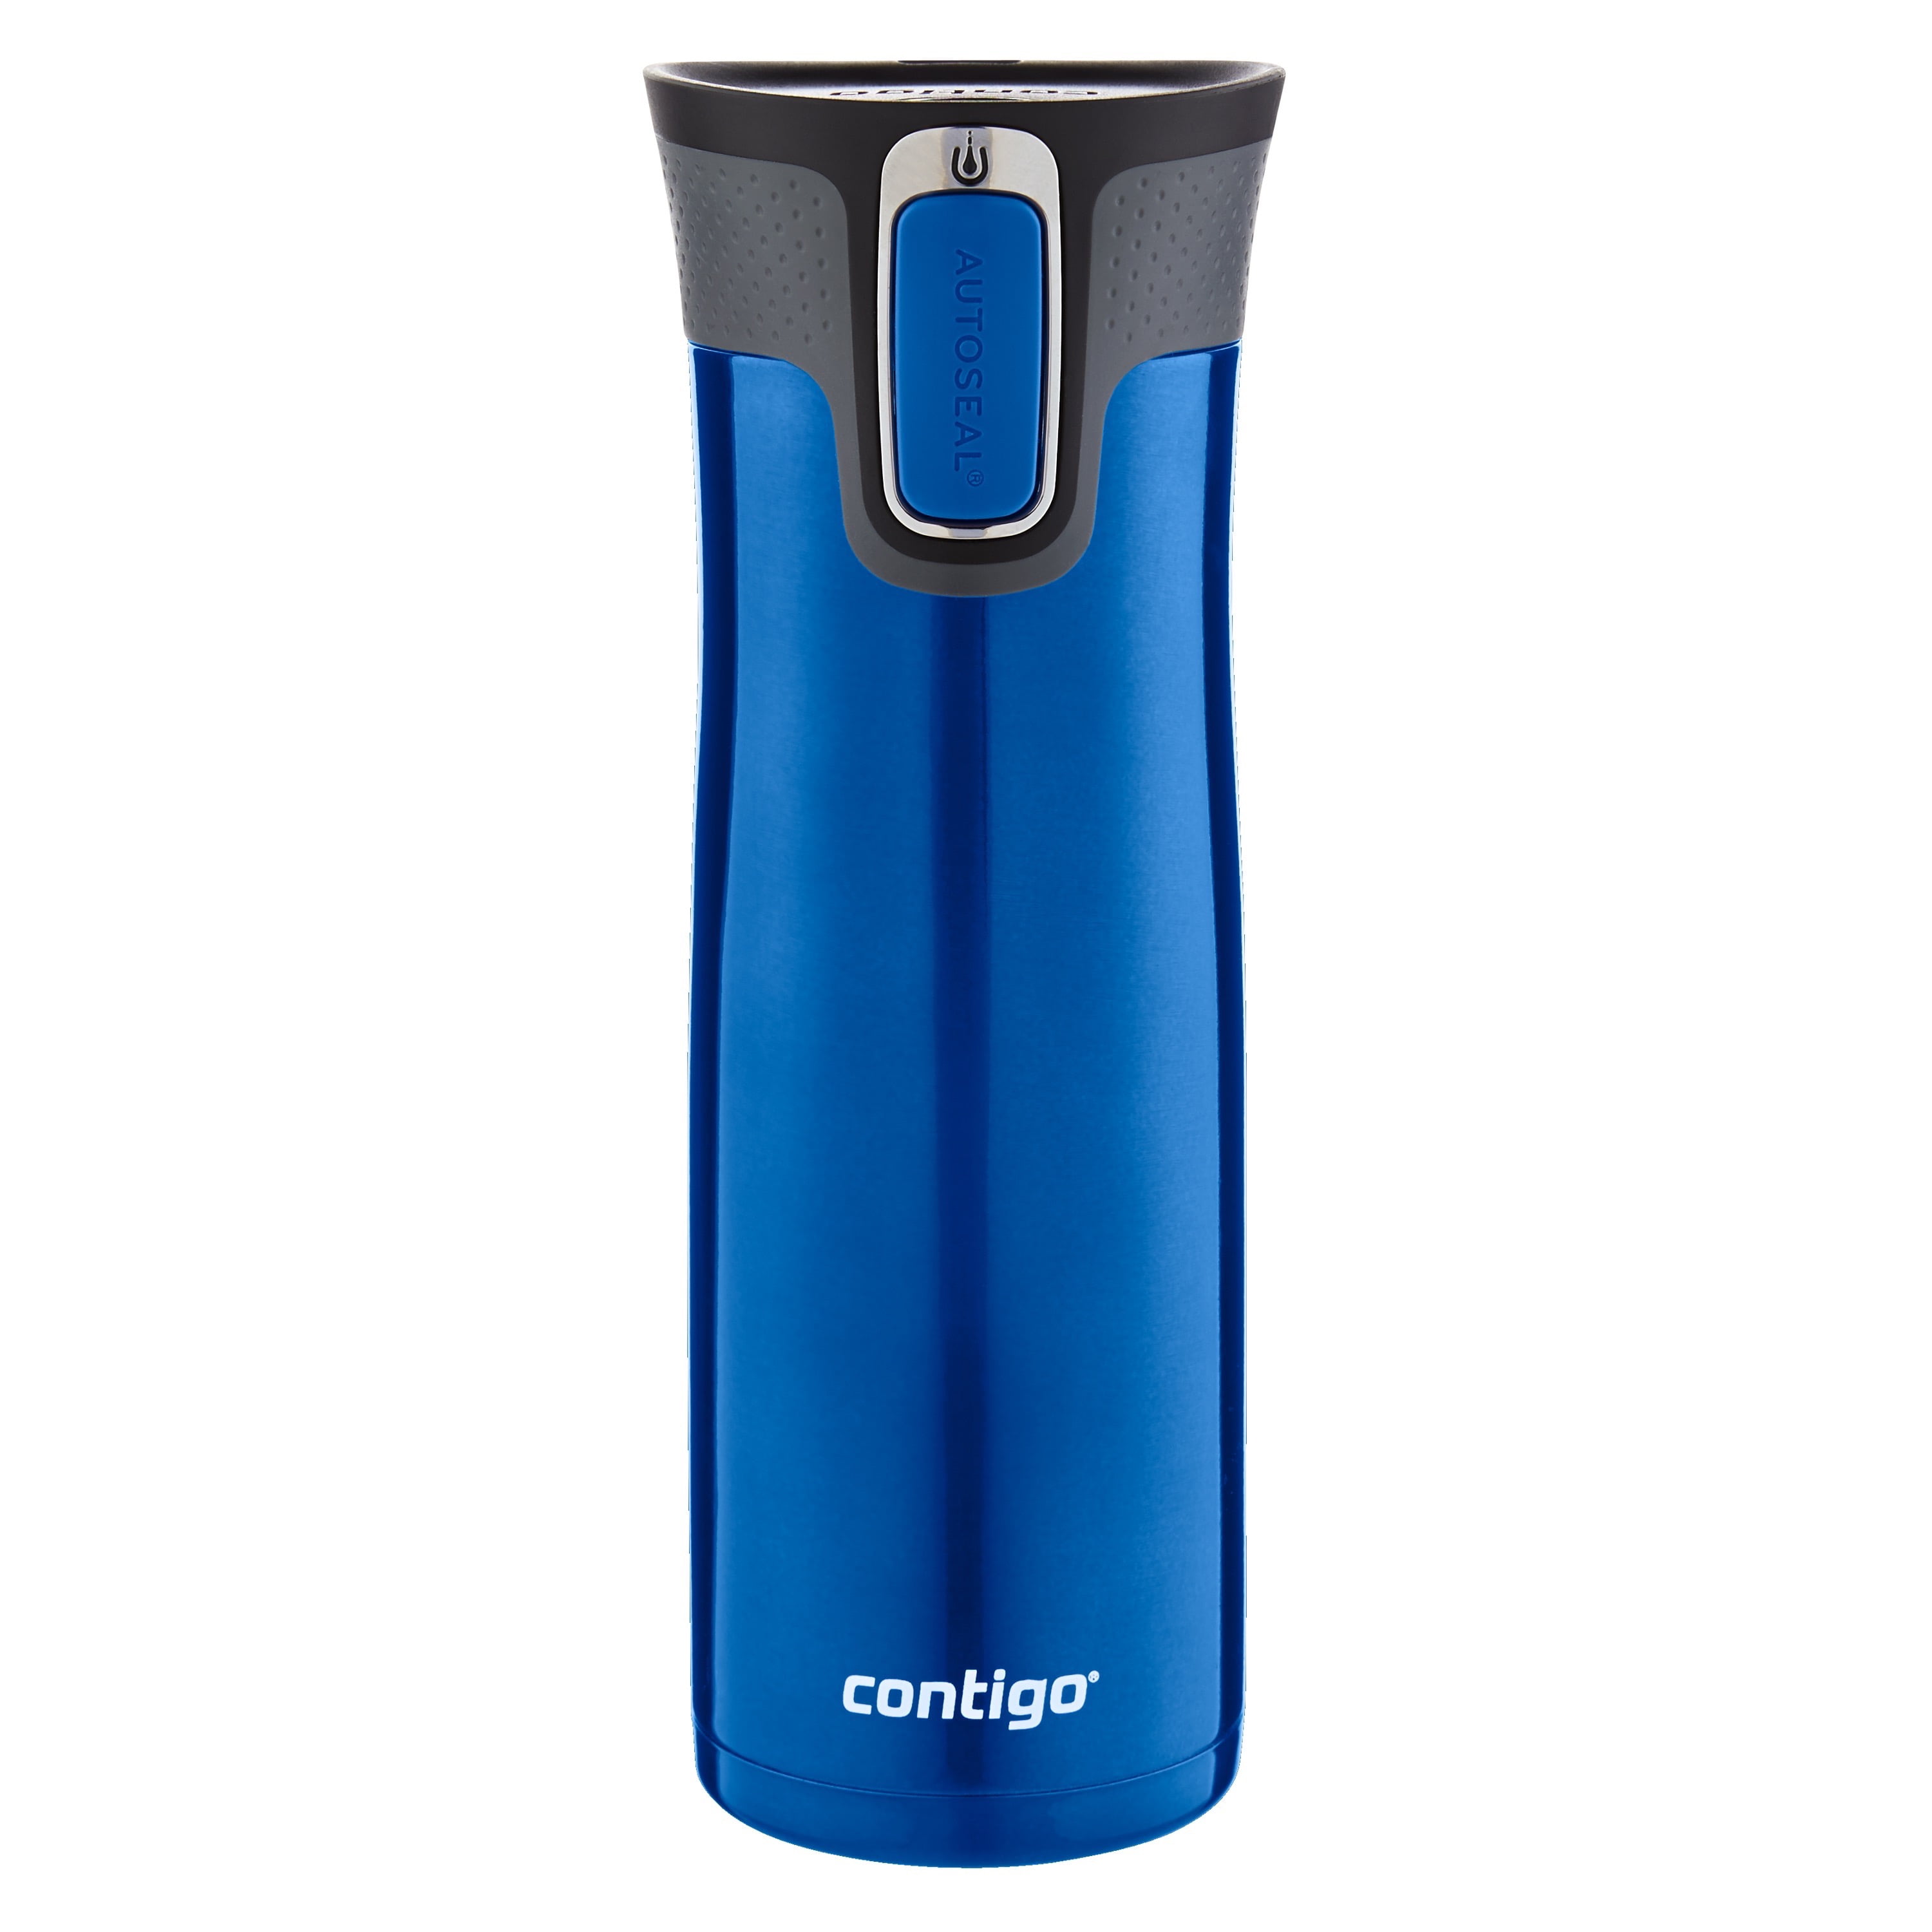 Contigo AUTOSEAL Fit Trainer Stainless Steel Water Bottle, 20 oz, Dazzling  Blue,  price tracker / tracking,  price history charts,   price watches,  price drop alerts